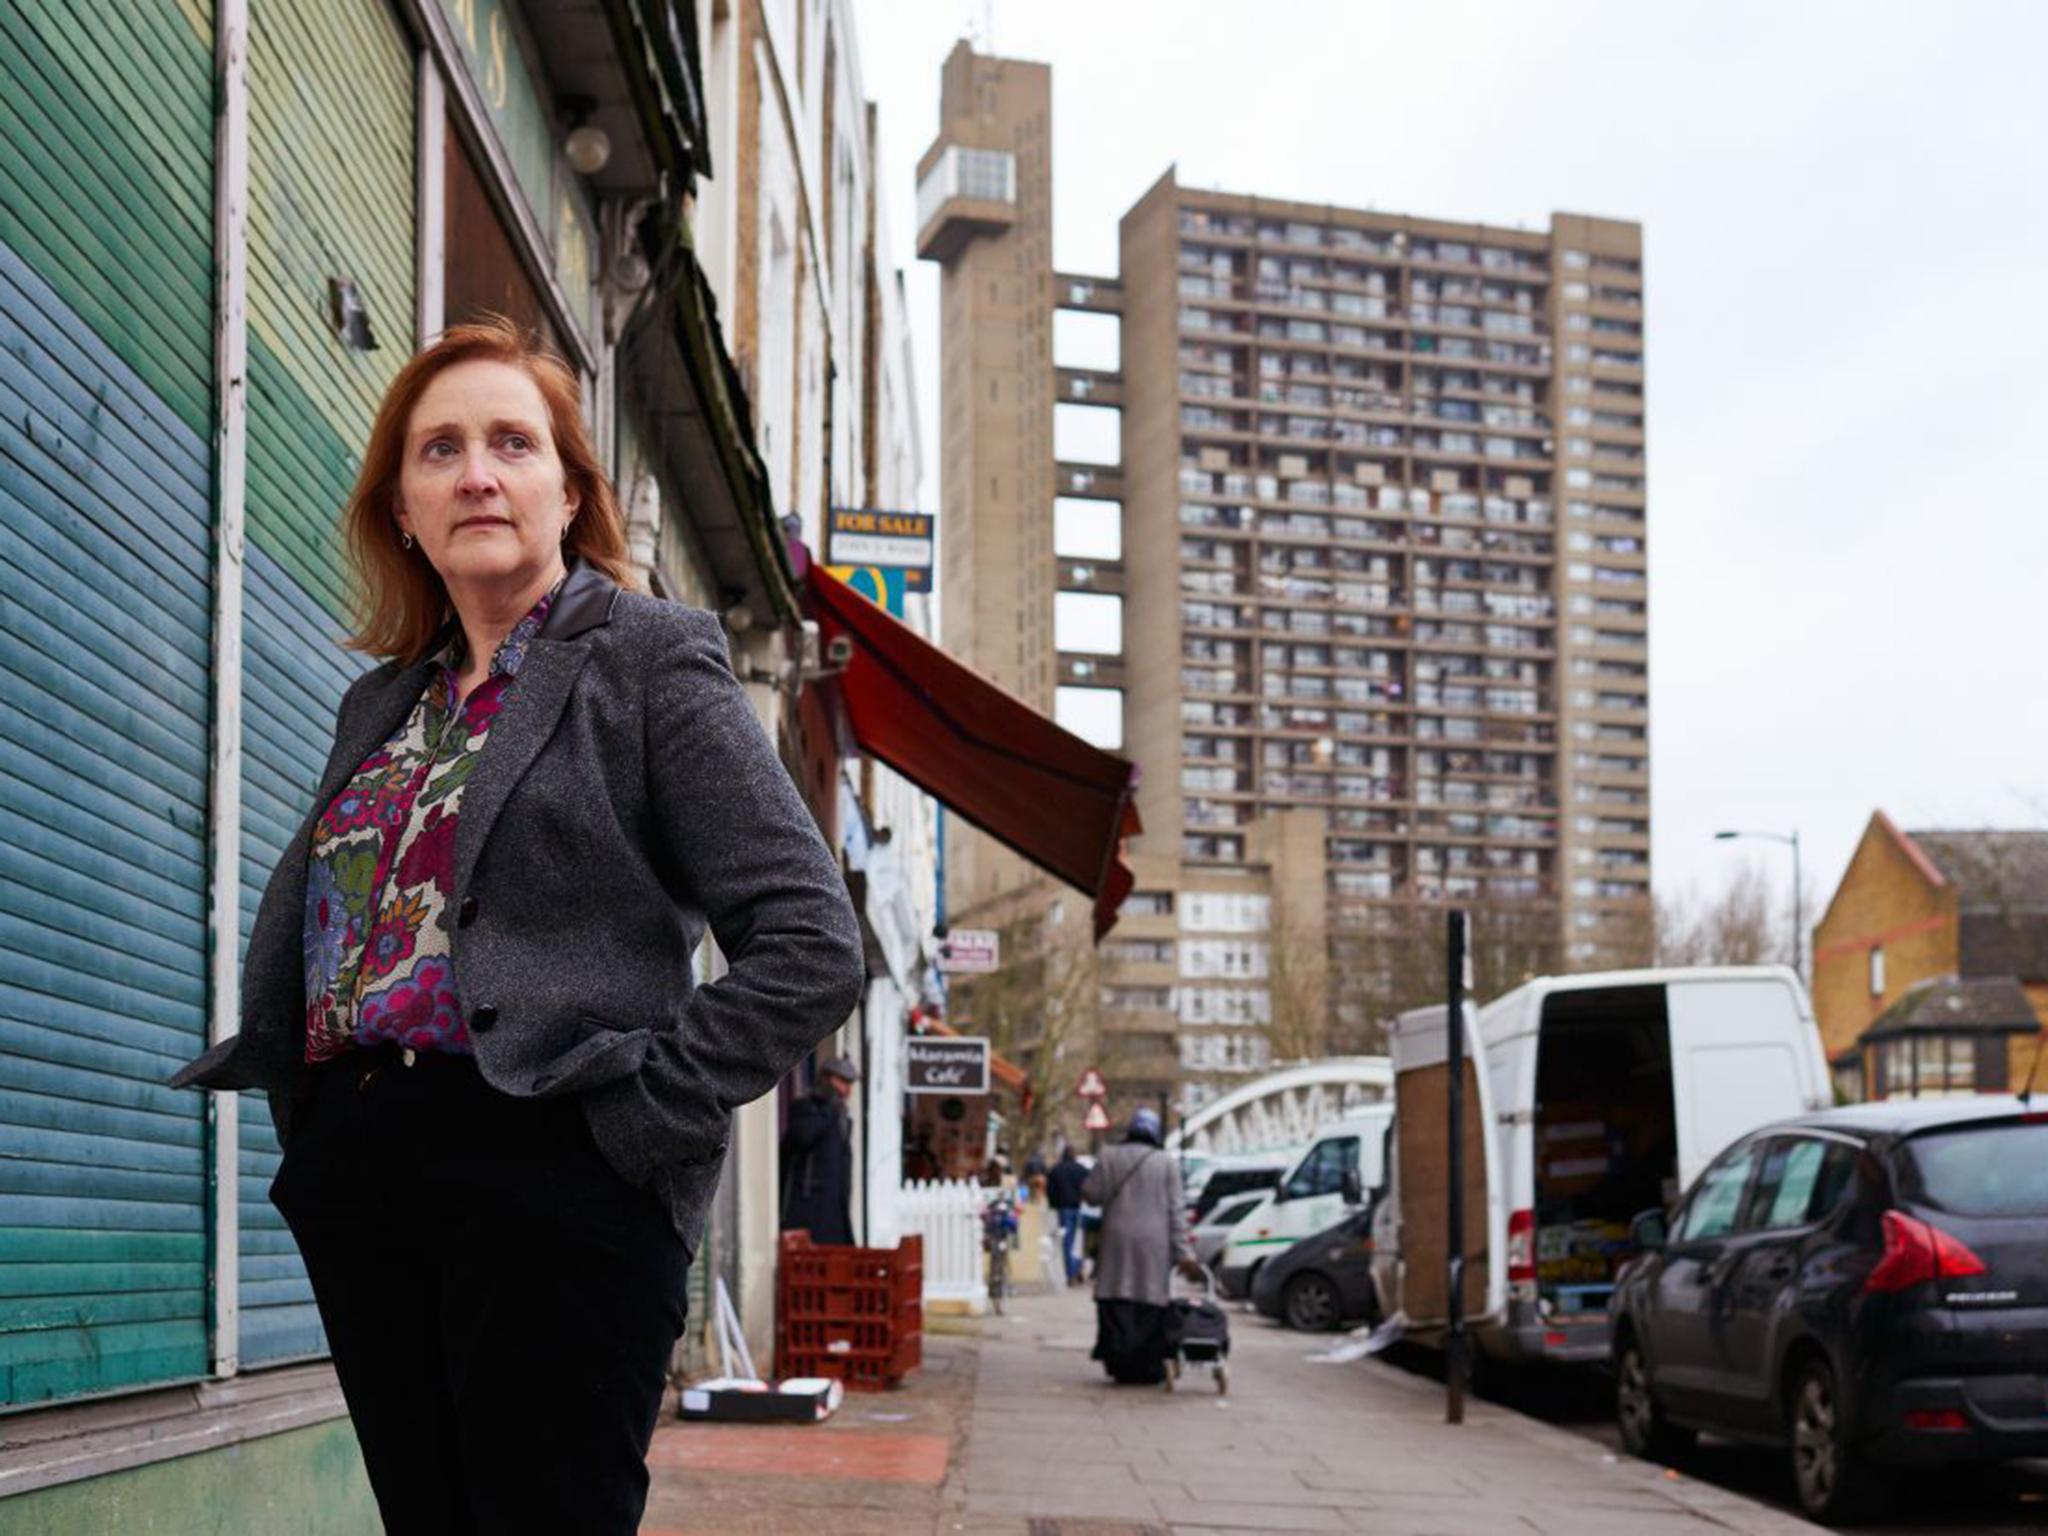 ‘This has been brewing for a very long time,’ said Emma Dent Coad